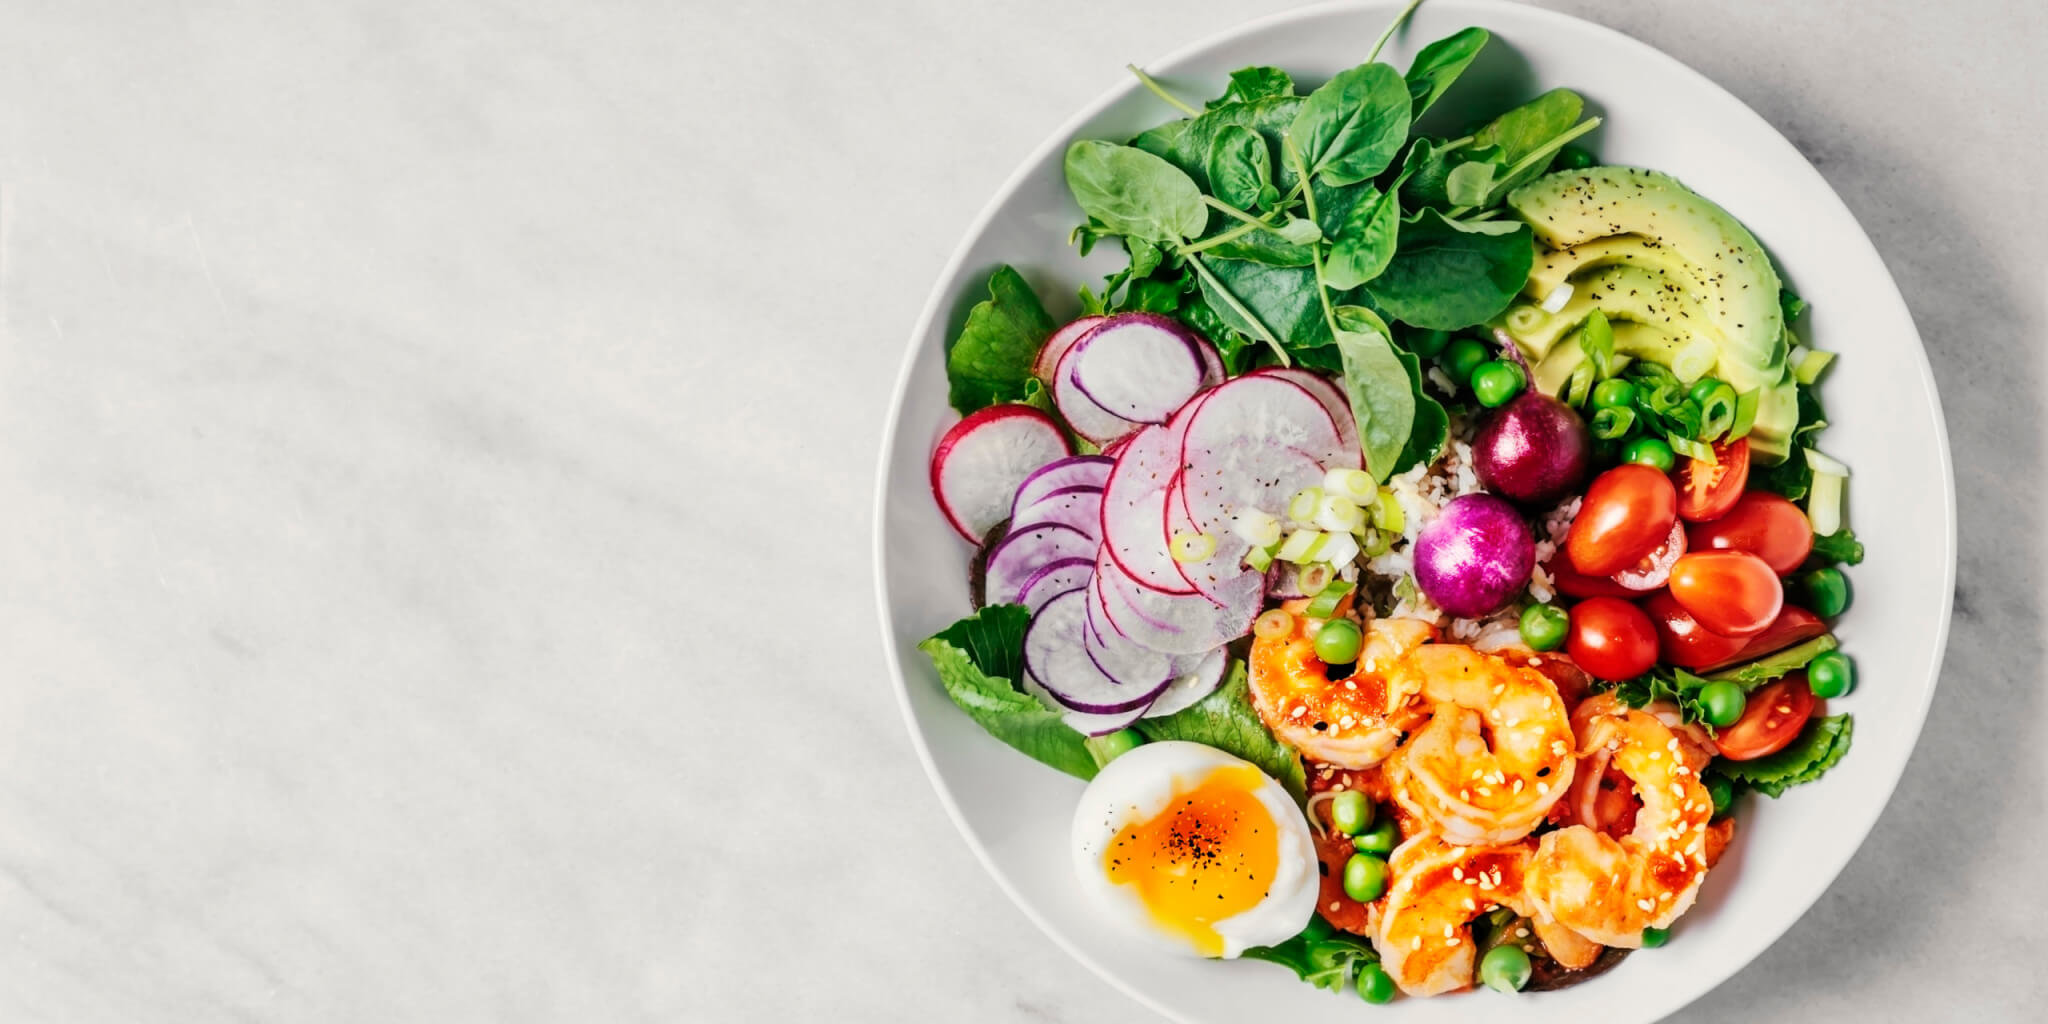 How to Build a Healthy, Delicious, and Filling Salad | Shaklee